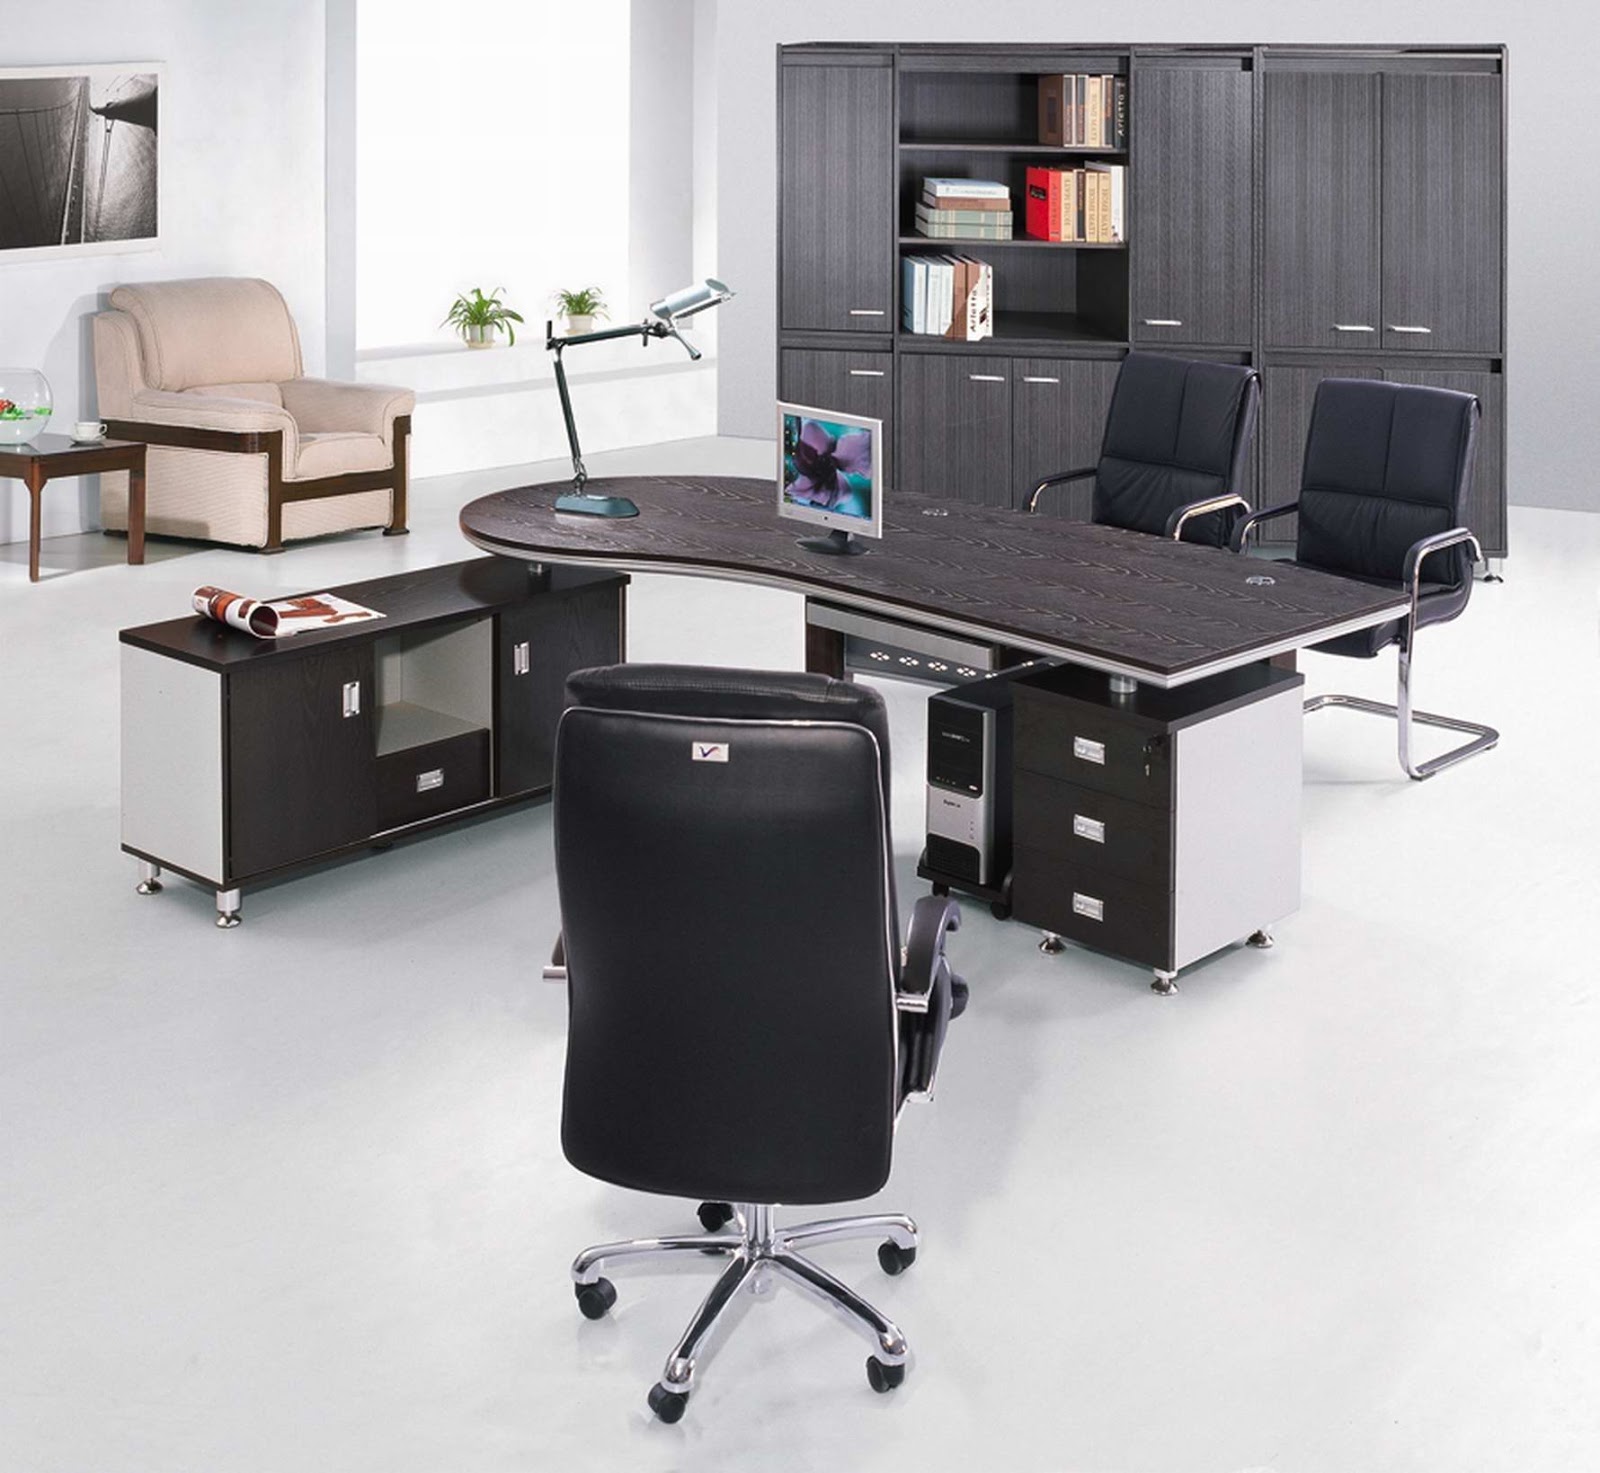 plans office furniture